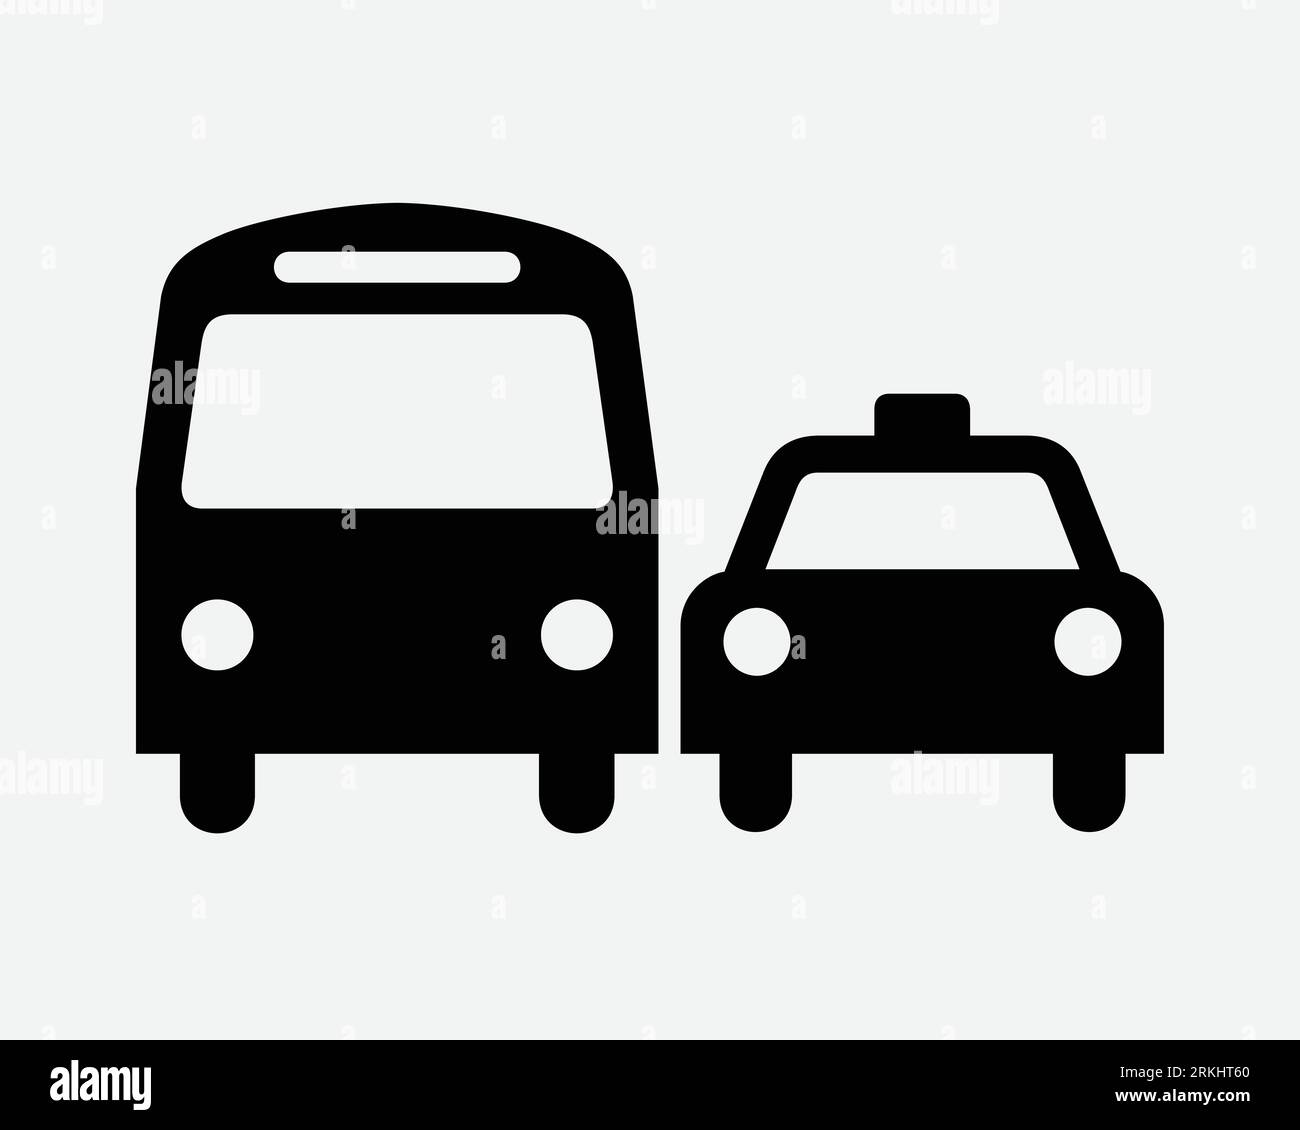 Bus and Taxi Icon Public Transportation Transport Front View Frontal Approach Vehicle Sign Symbol Passenger Cab Travel Black Shape Vector Sign Symbol Stock Vector